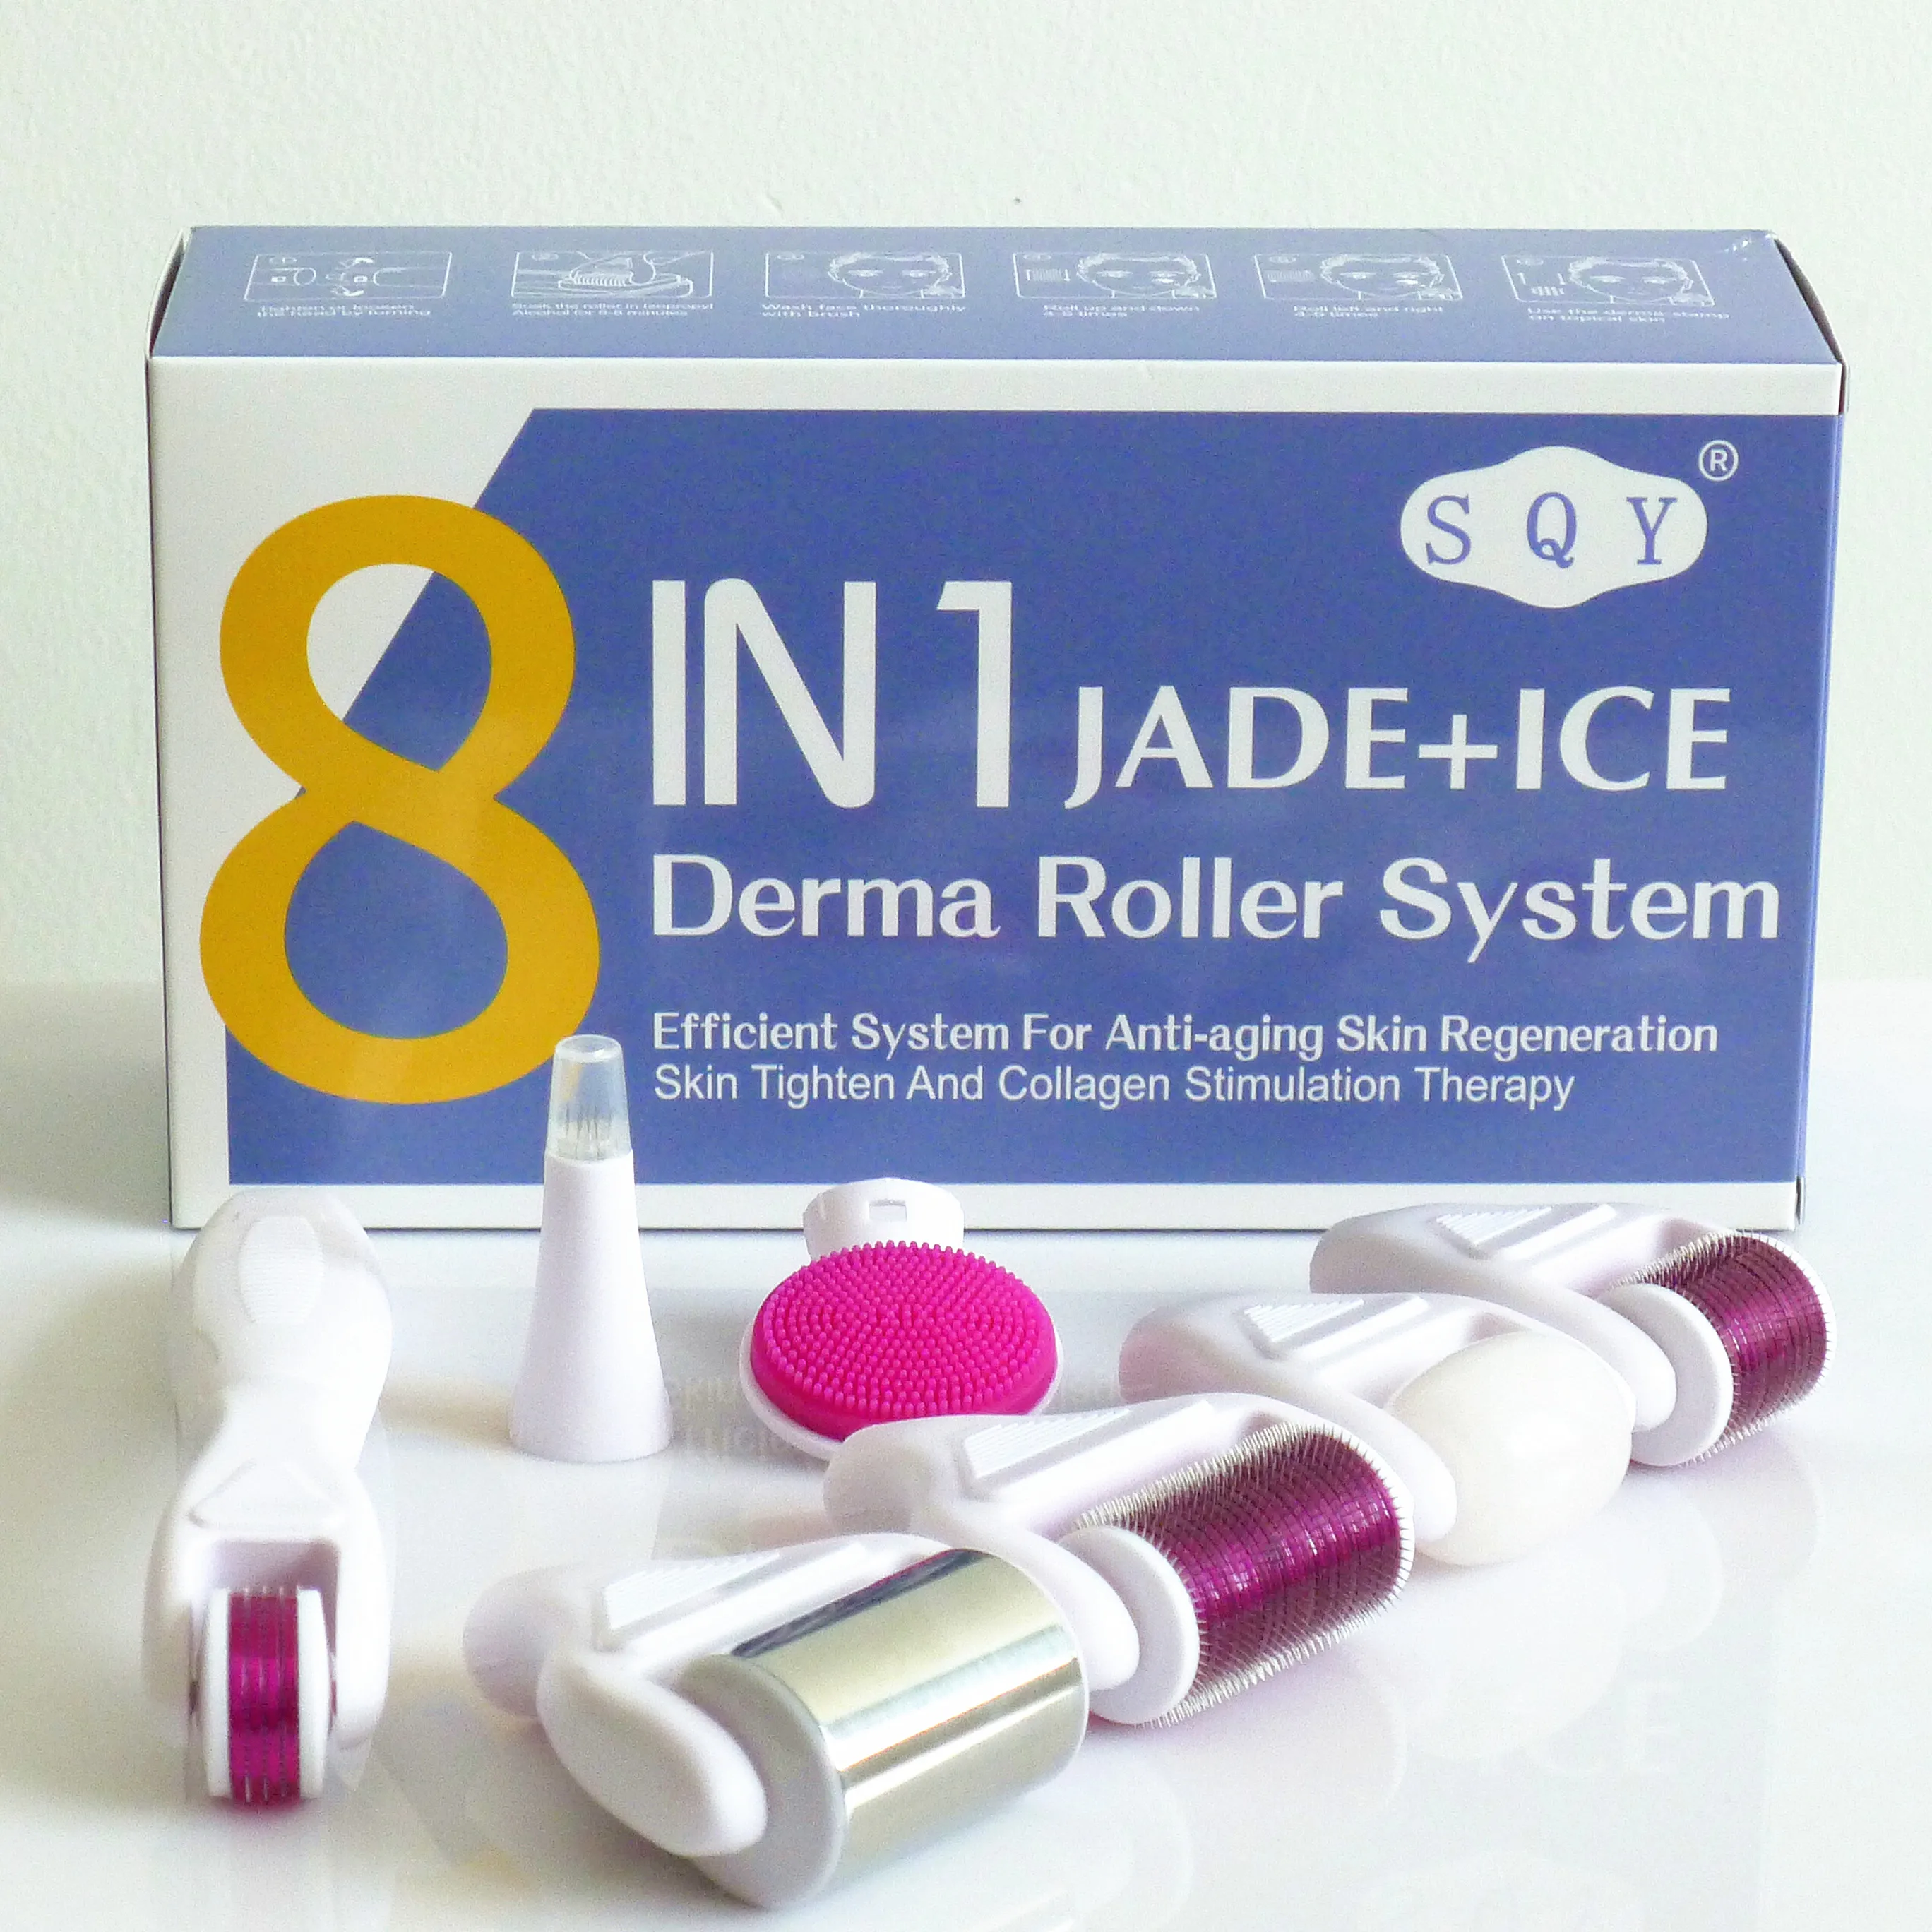 

Huafu New 8 in1 Micro Rolling System Facial Ice Jade Roller dermaroller manufacturer, Customized, any pms color is available